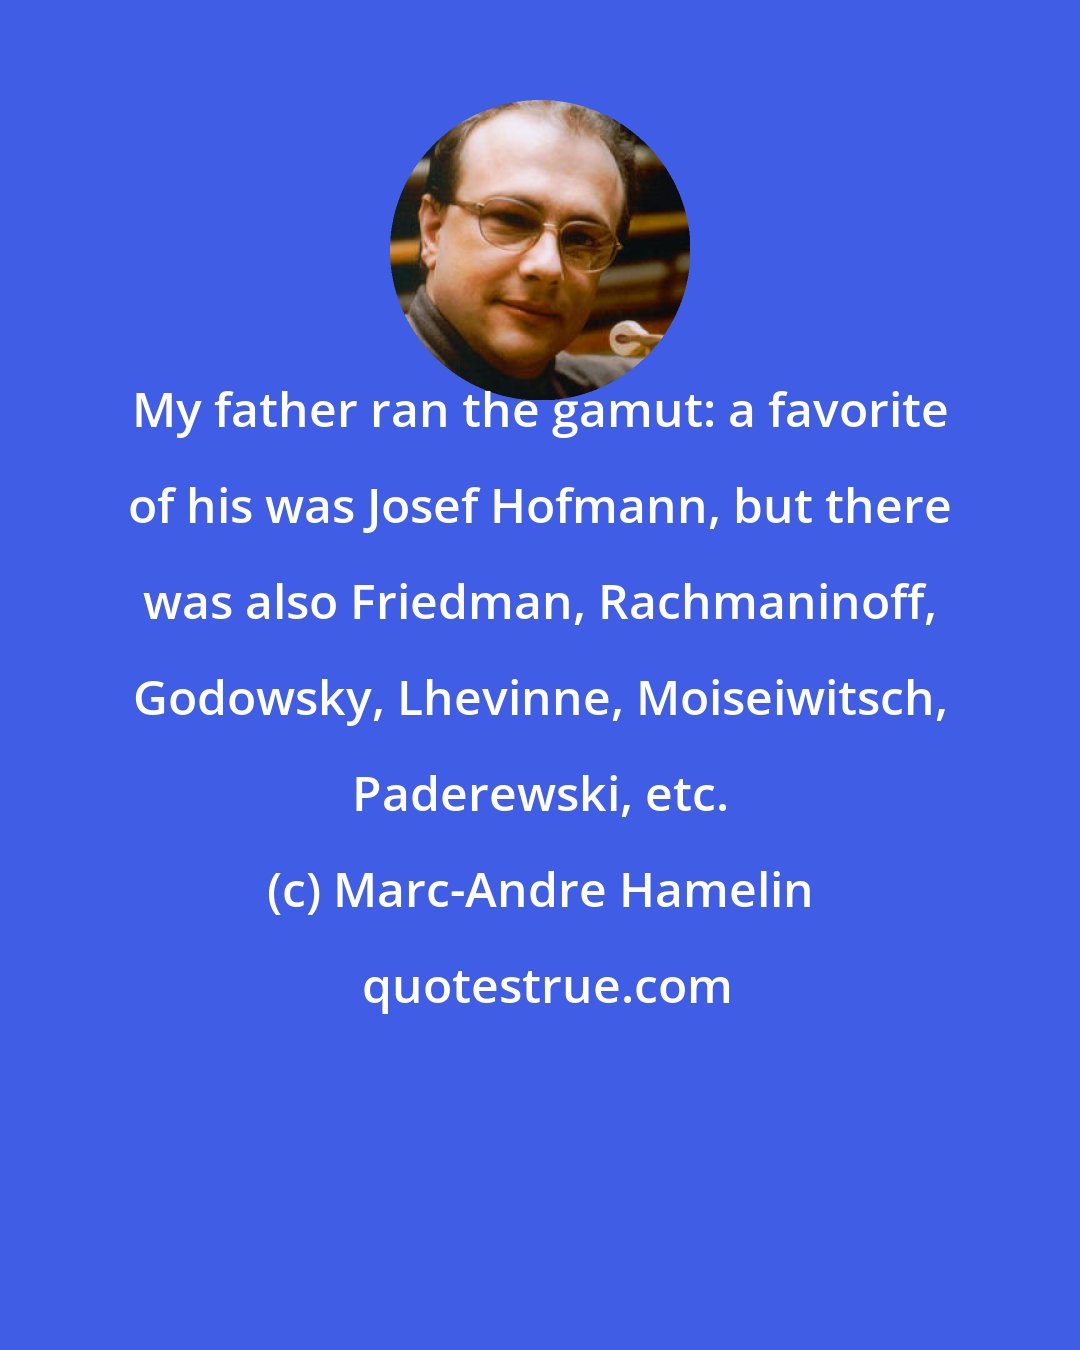 Marc-Andre Hamelin: My father ran the gamut: a favorite of his was Josef Hofmann, but there was also Friedman, Rachmaninoff, Godowsky, Lhevinne, Moiseiwitsch, Paderewski, etc.